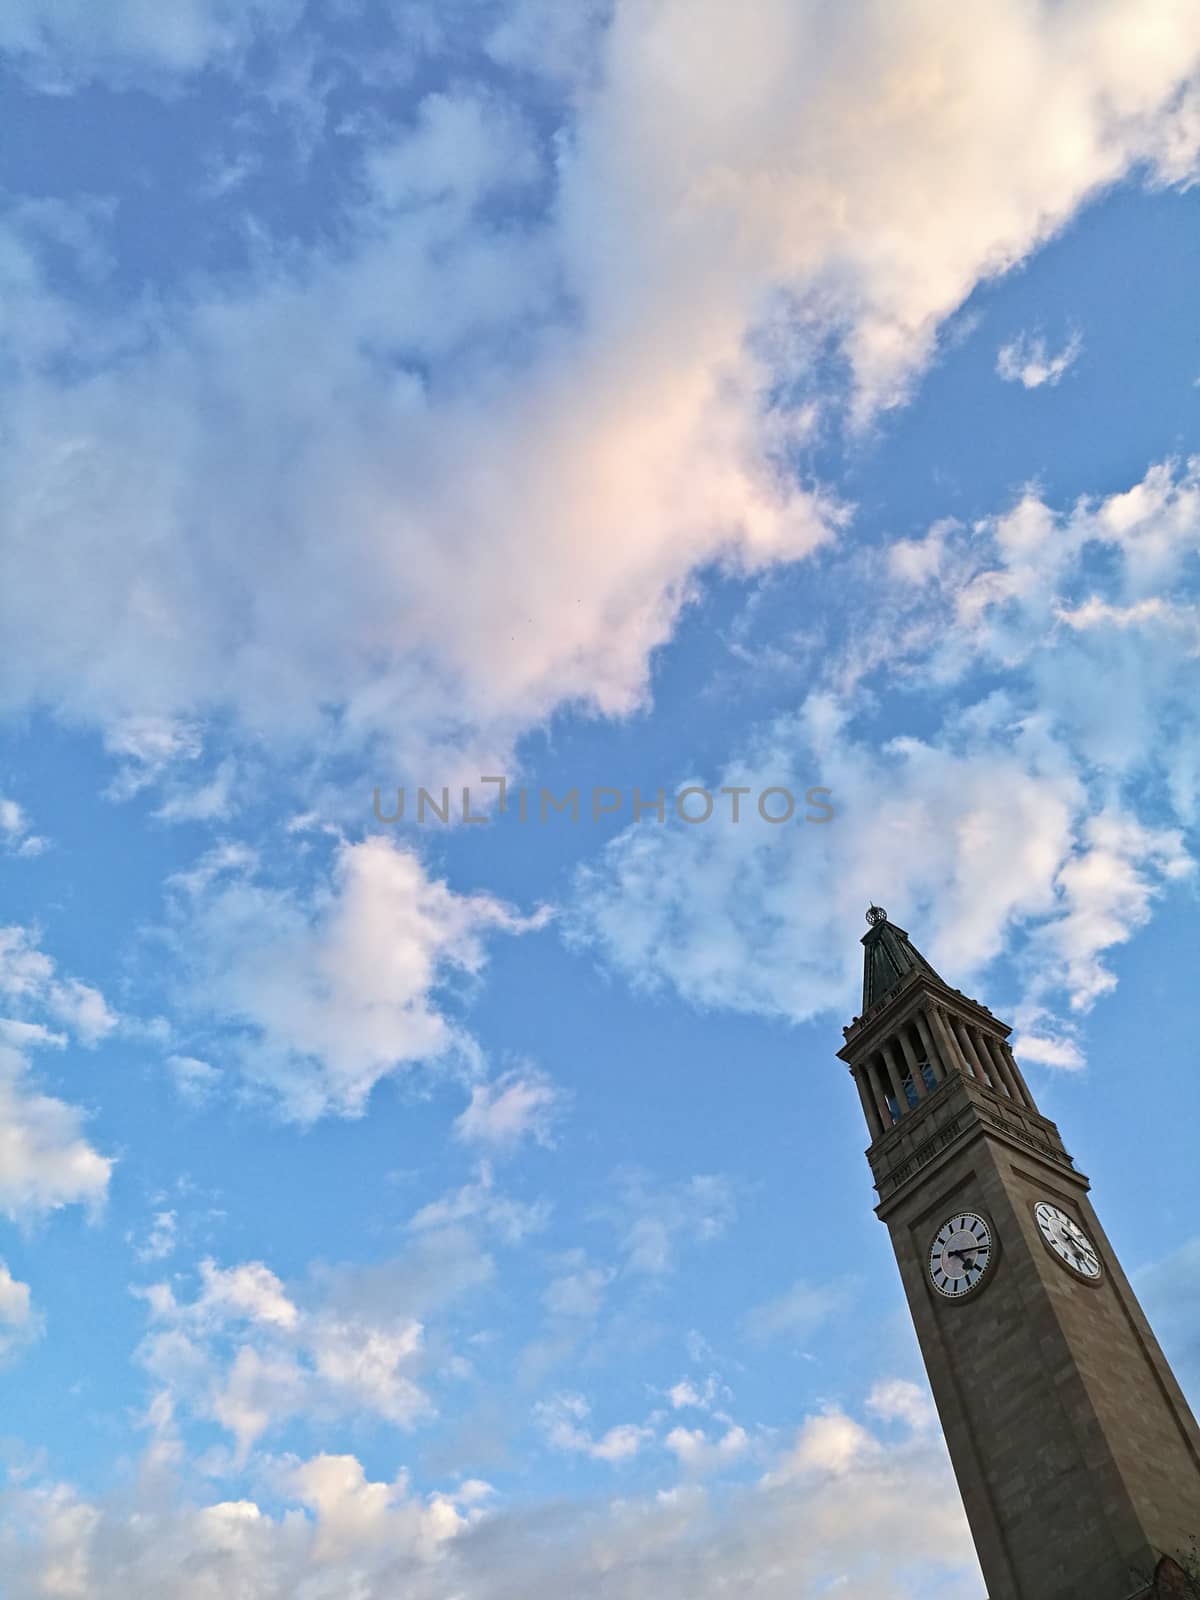 Old vintage classic tall clock tower with blue sky